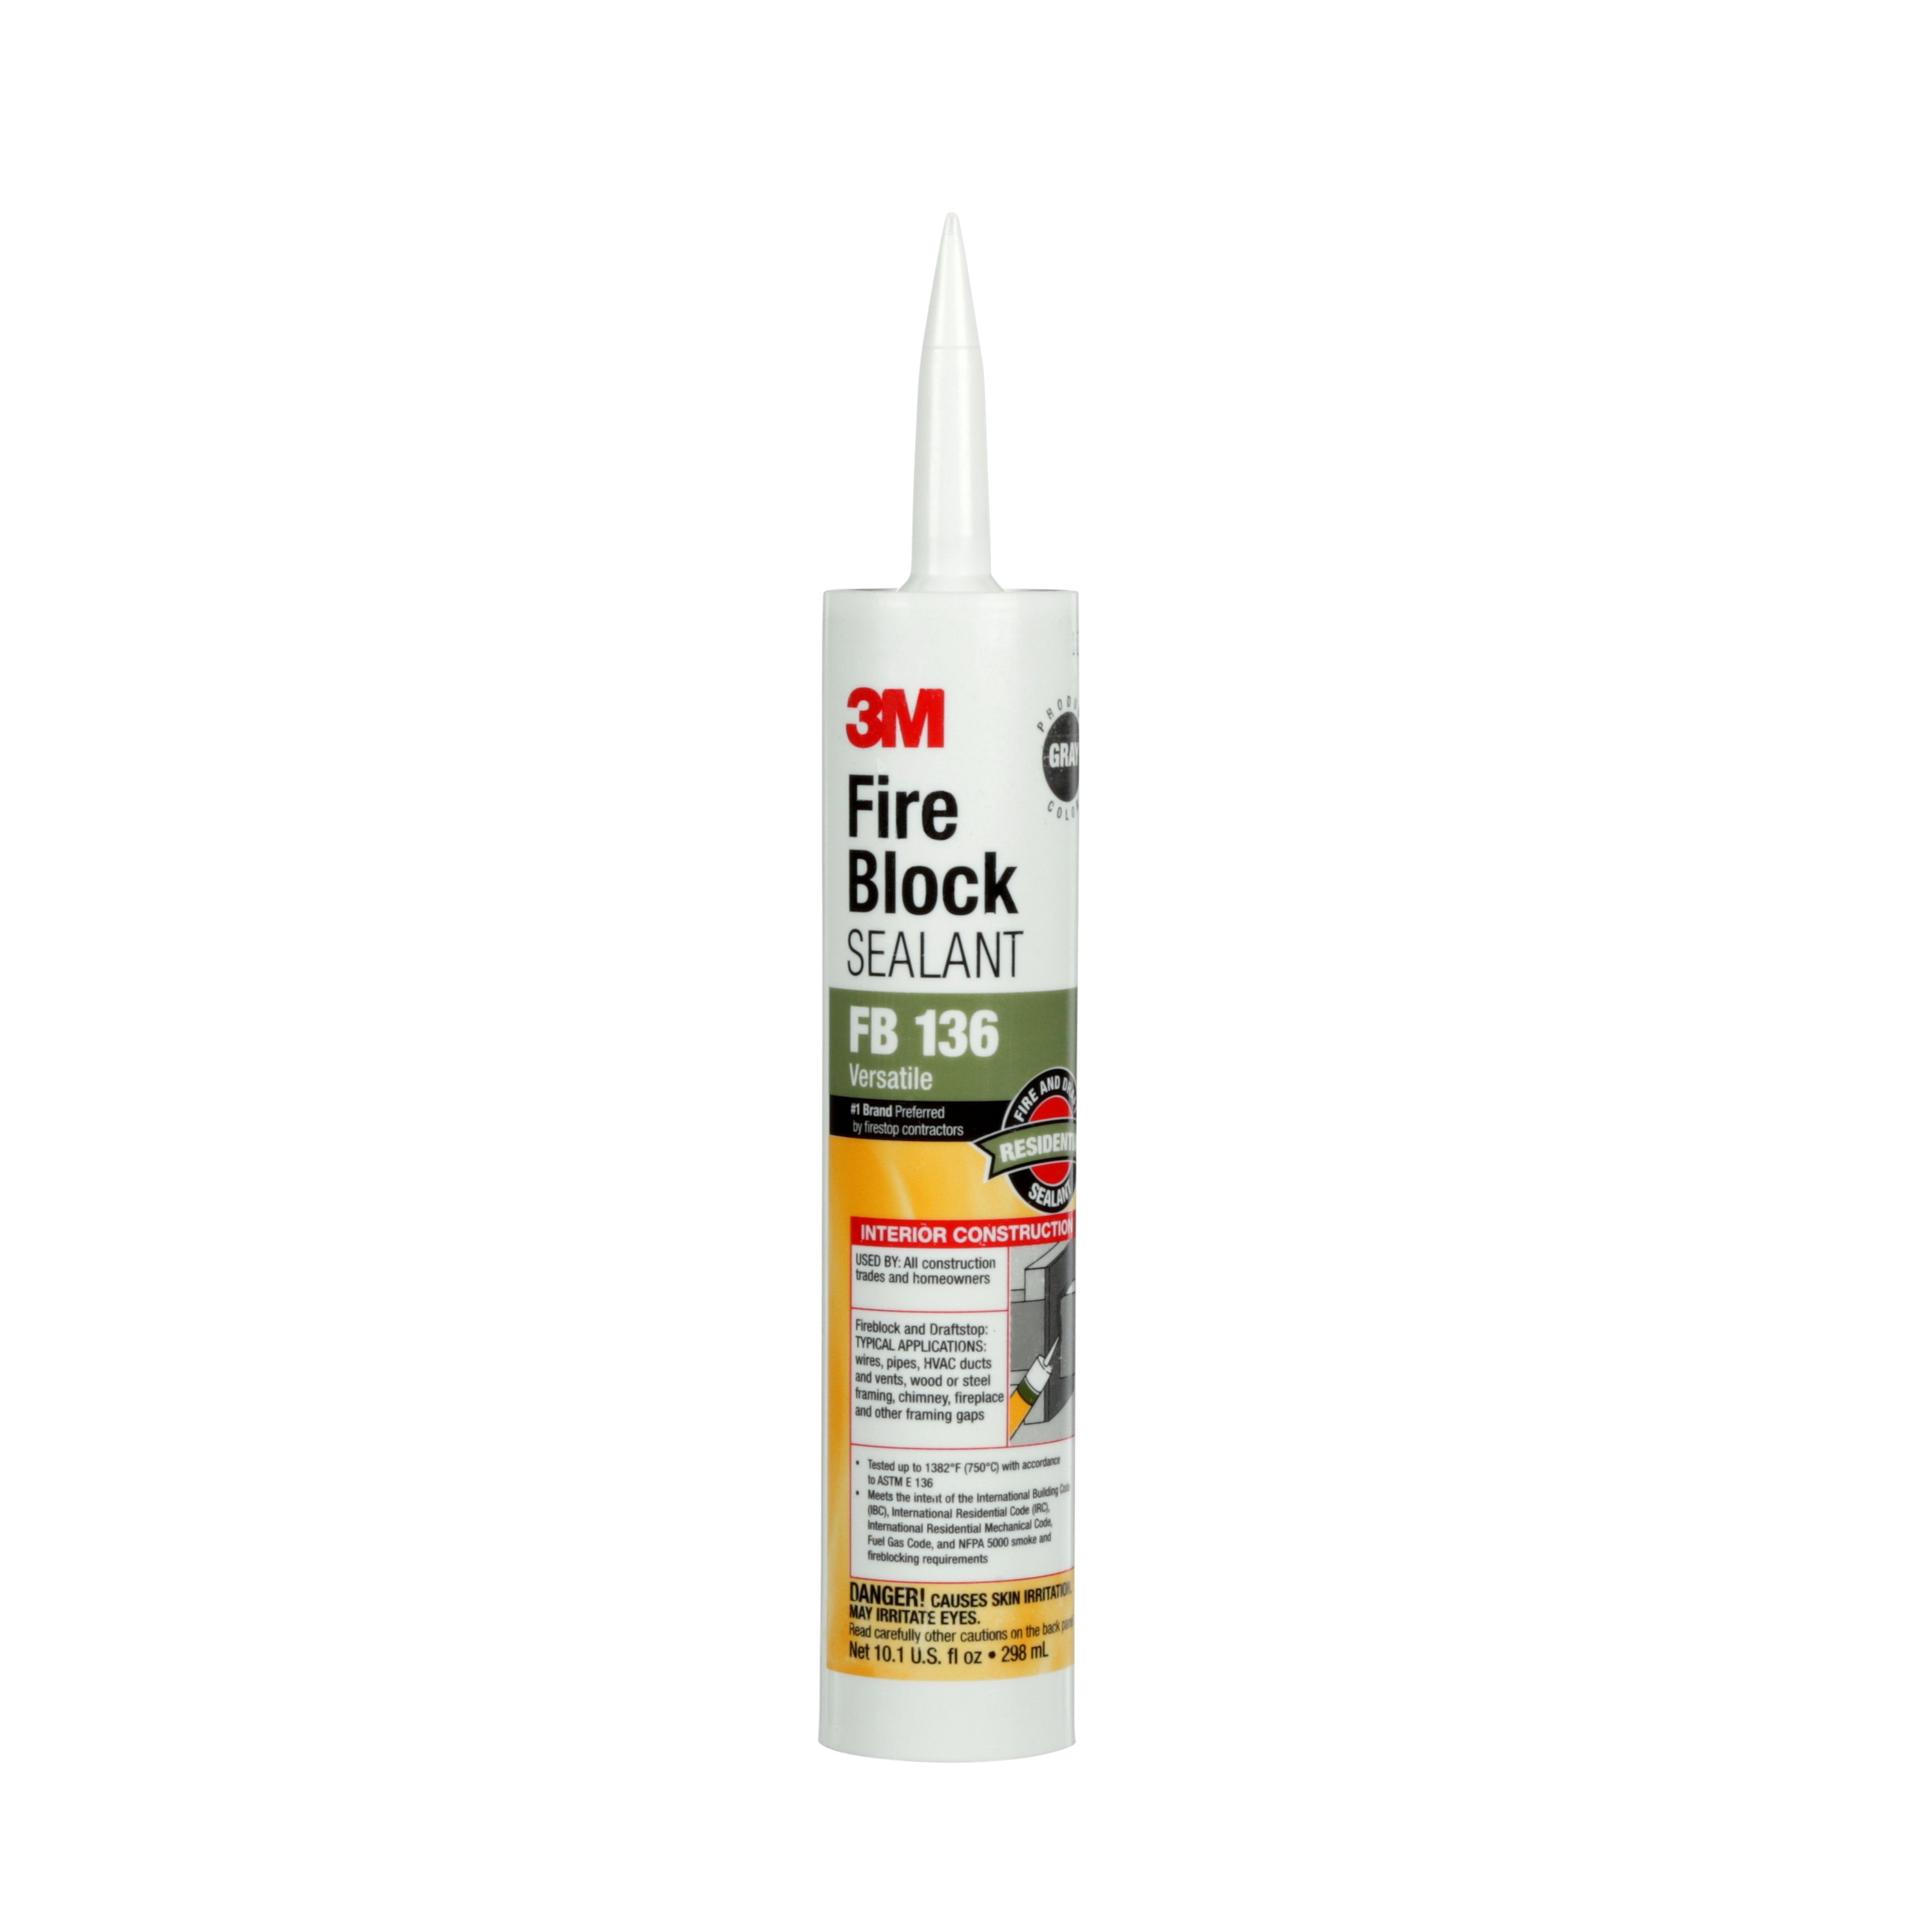 3M™ Fire Block FB 136 as a durable fireblock and draftstop. This product seals, fills, insulates and bonds for non-rated residential and commercial construction.